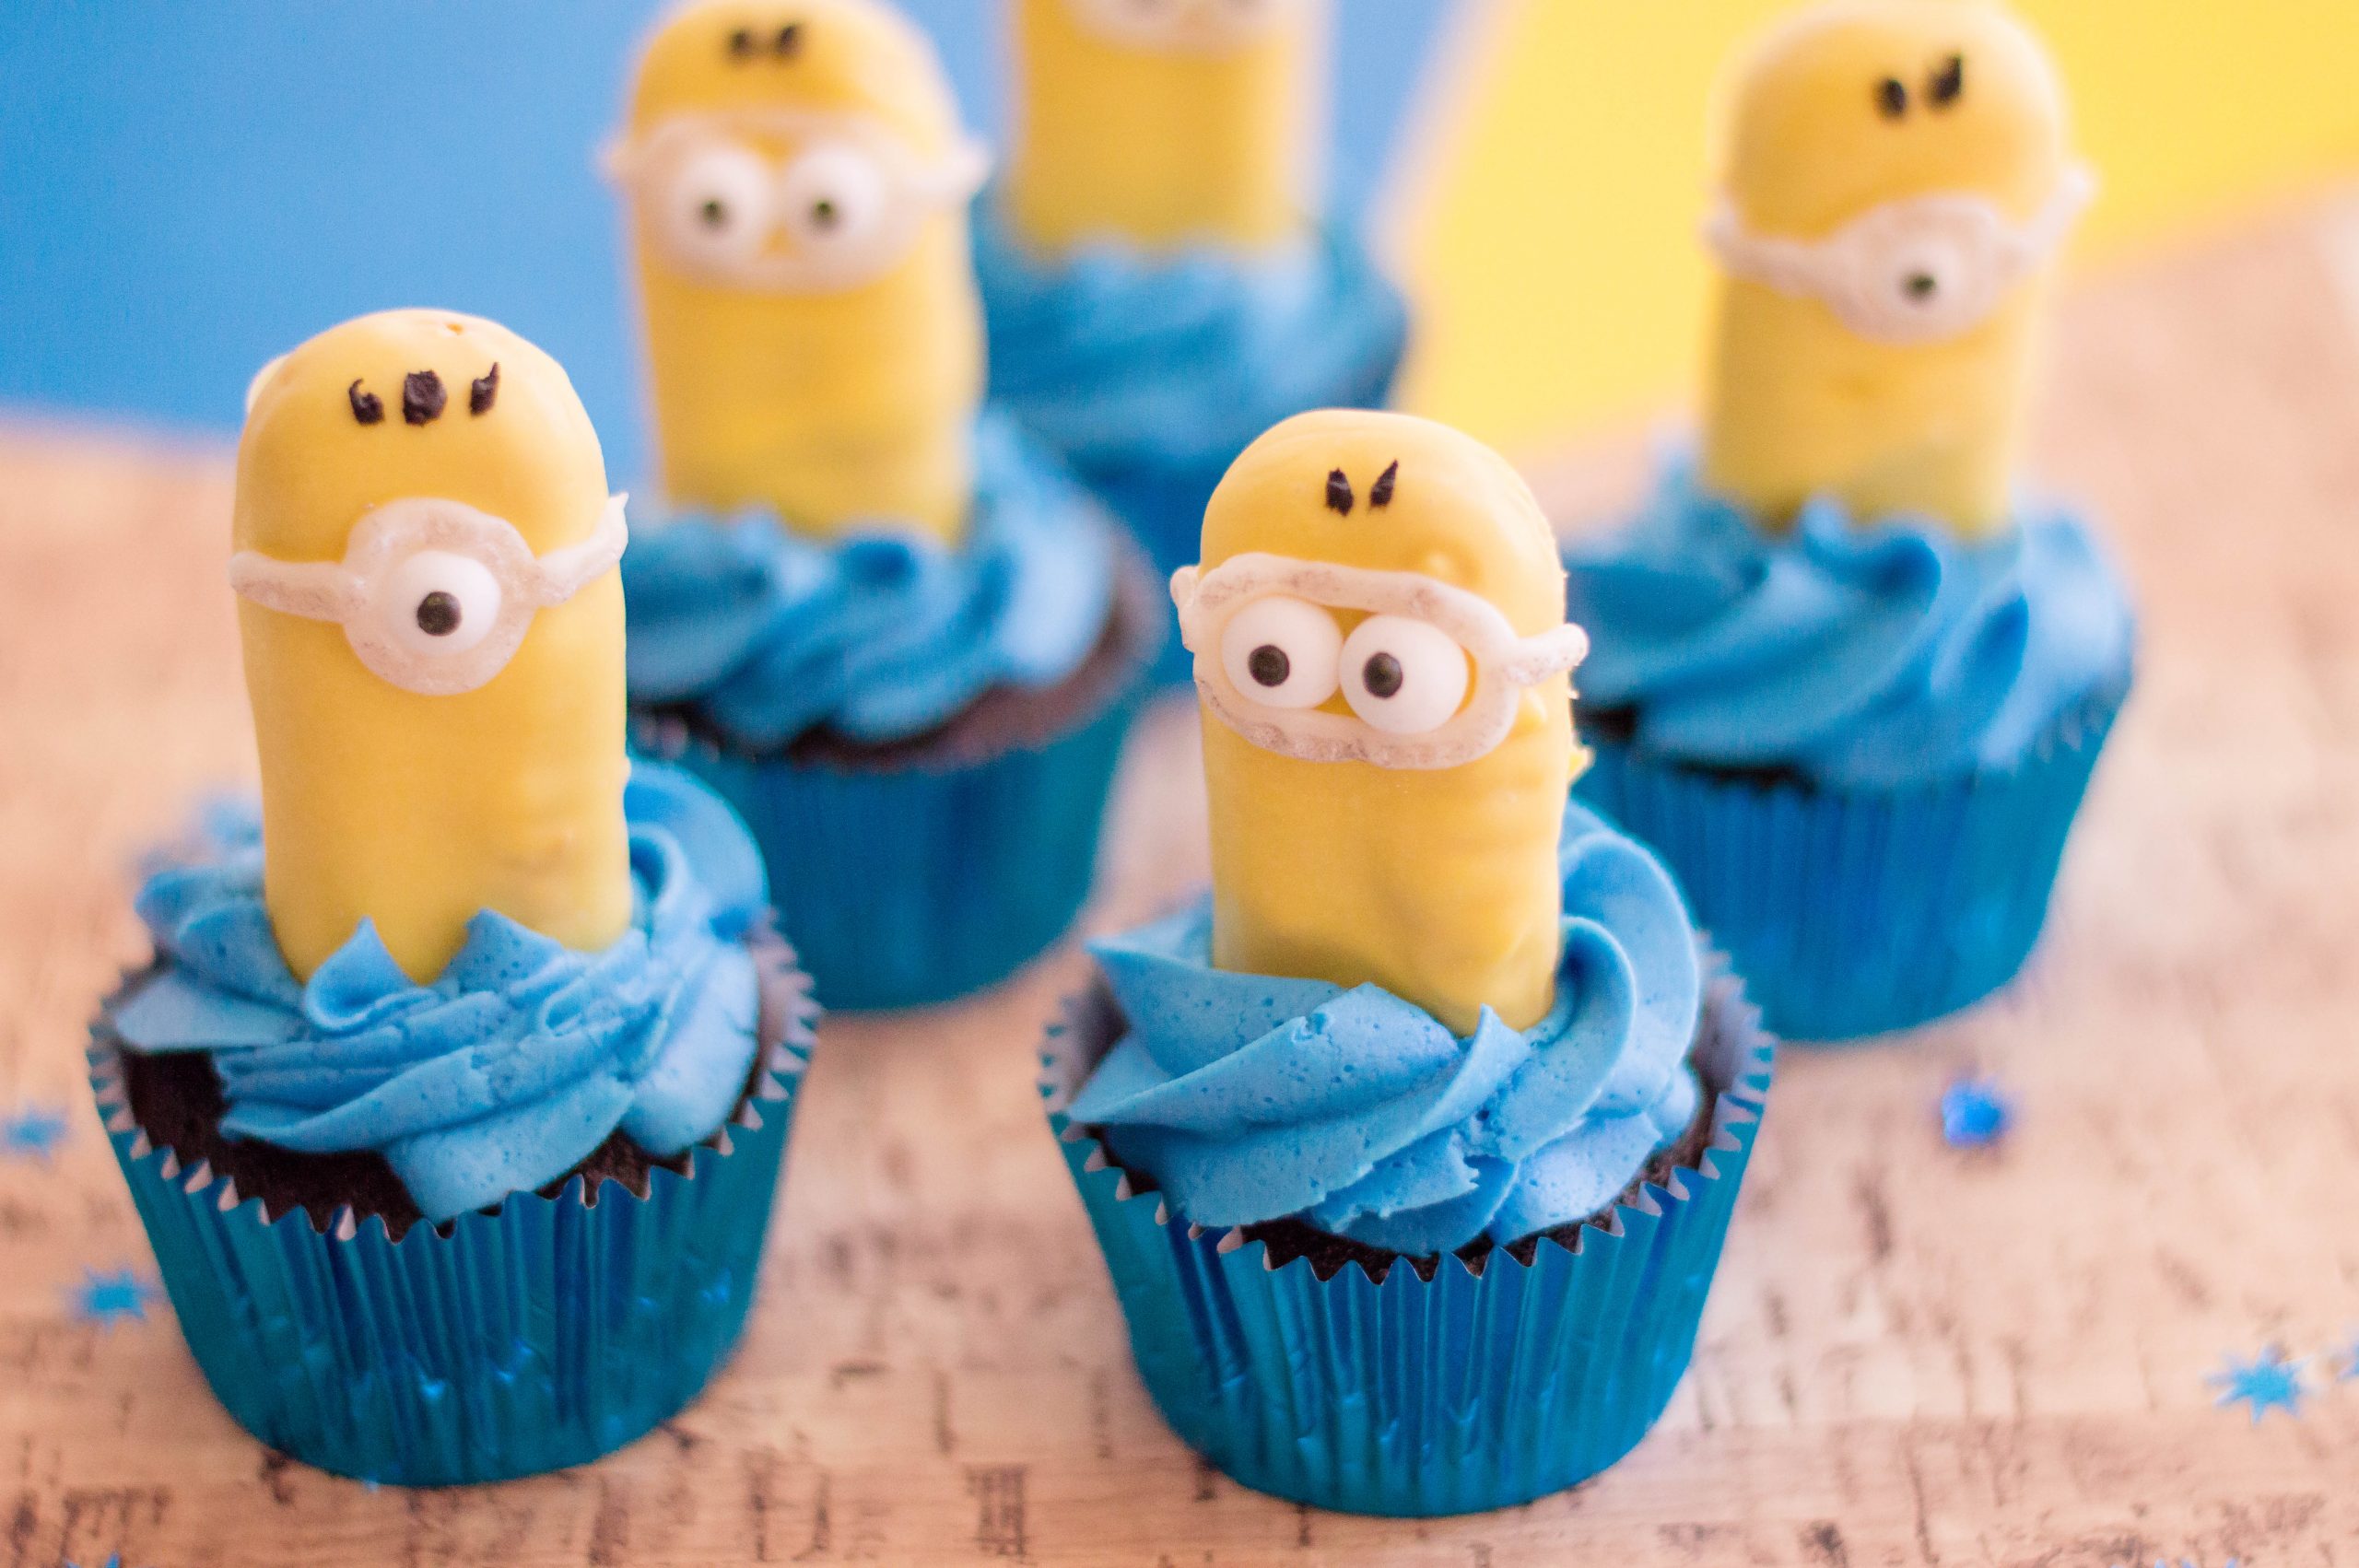 Decorated Minions Themed Cupcakes Recipe